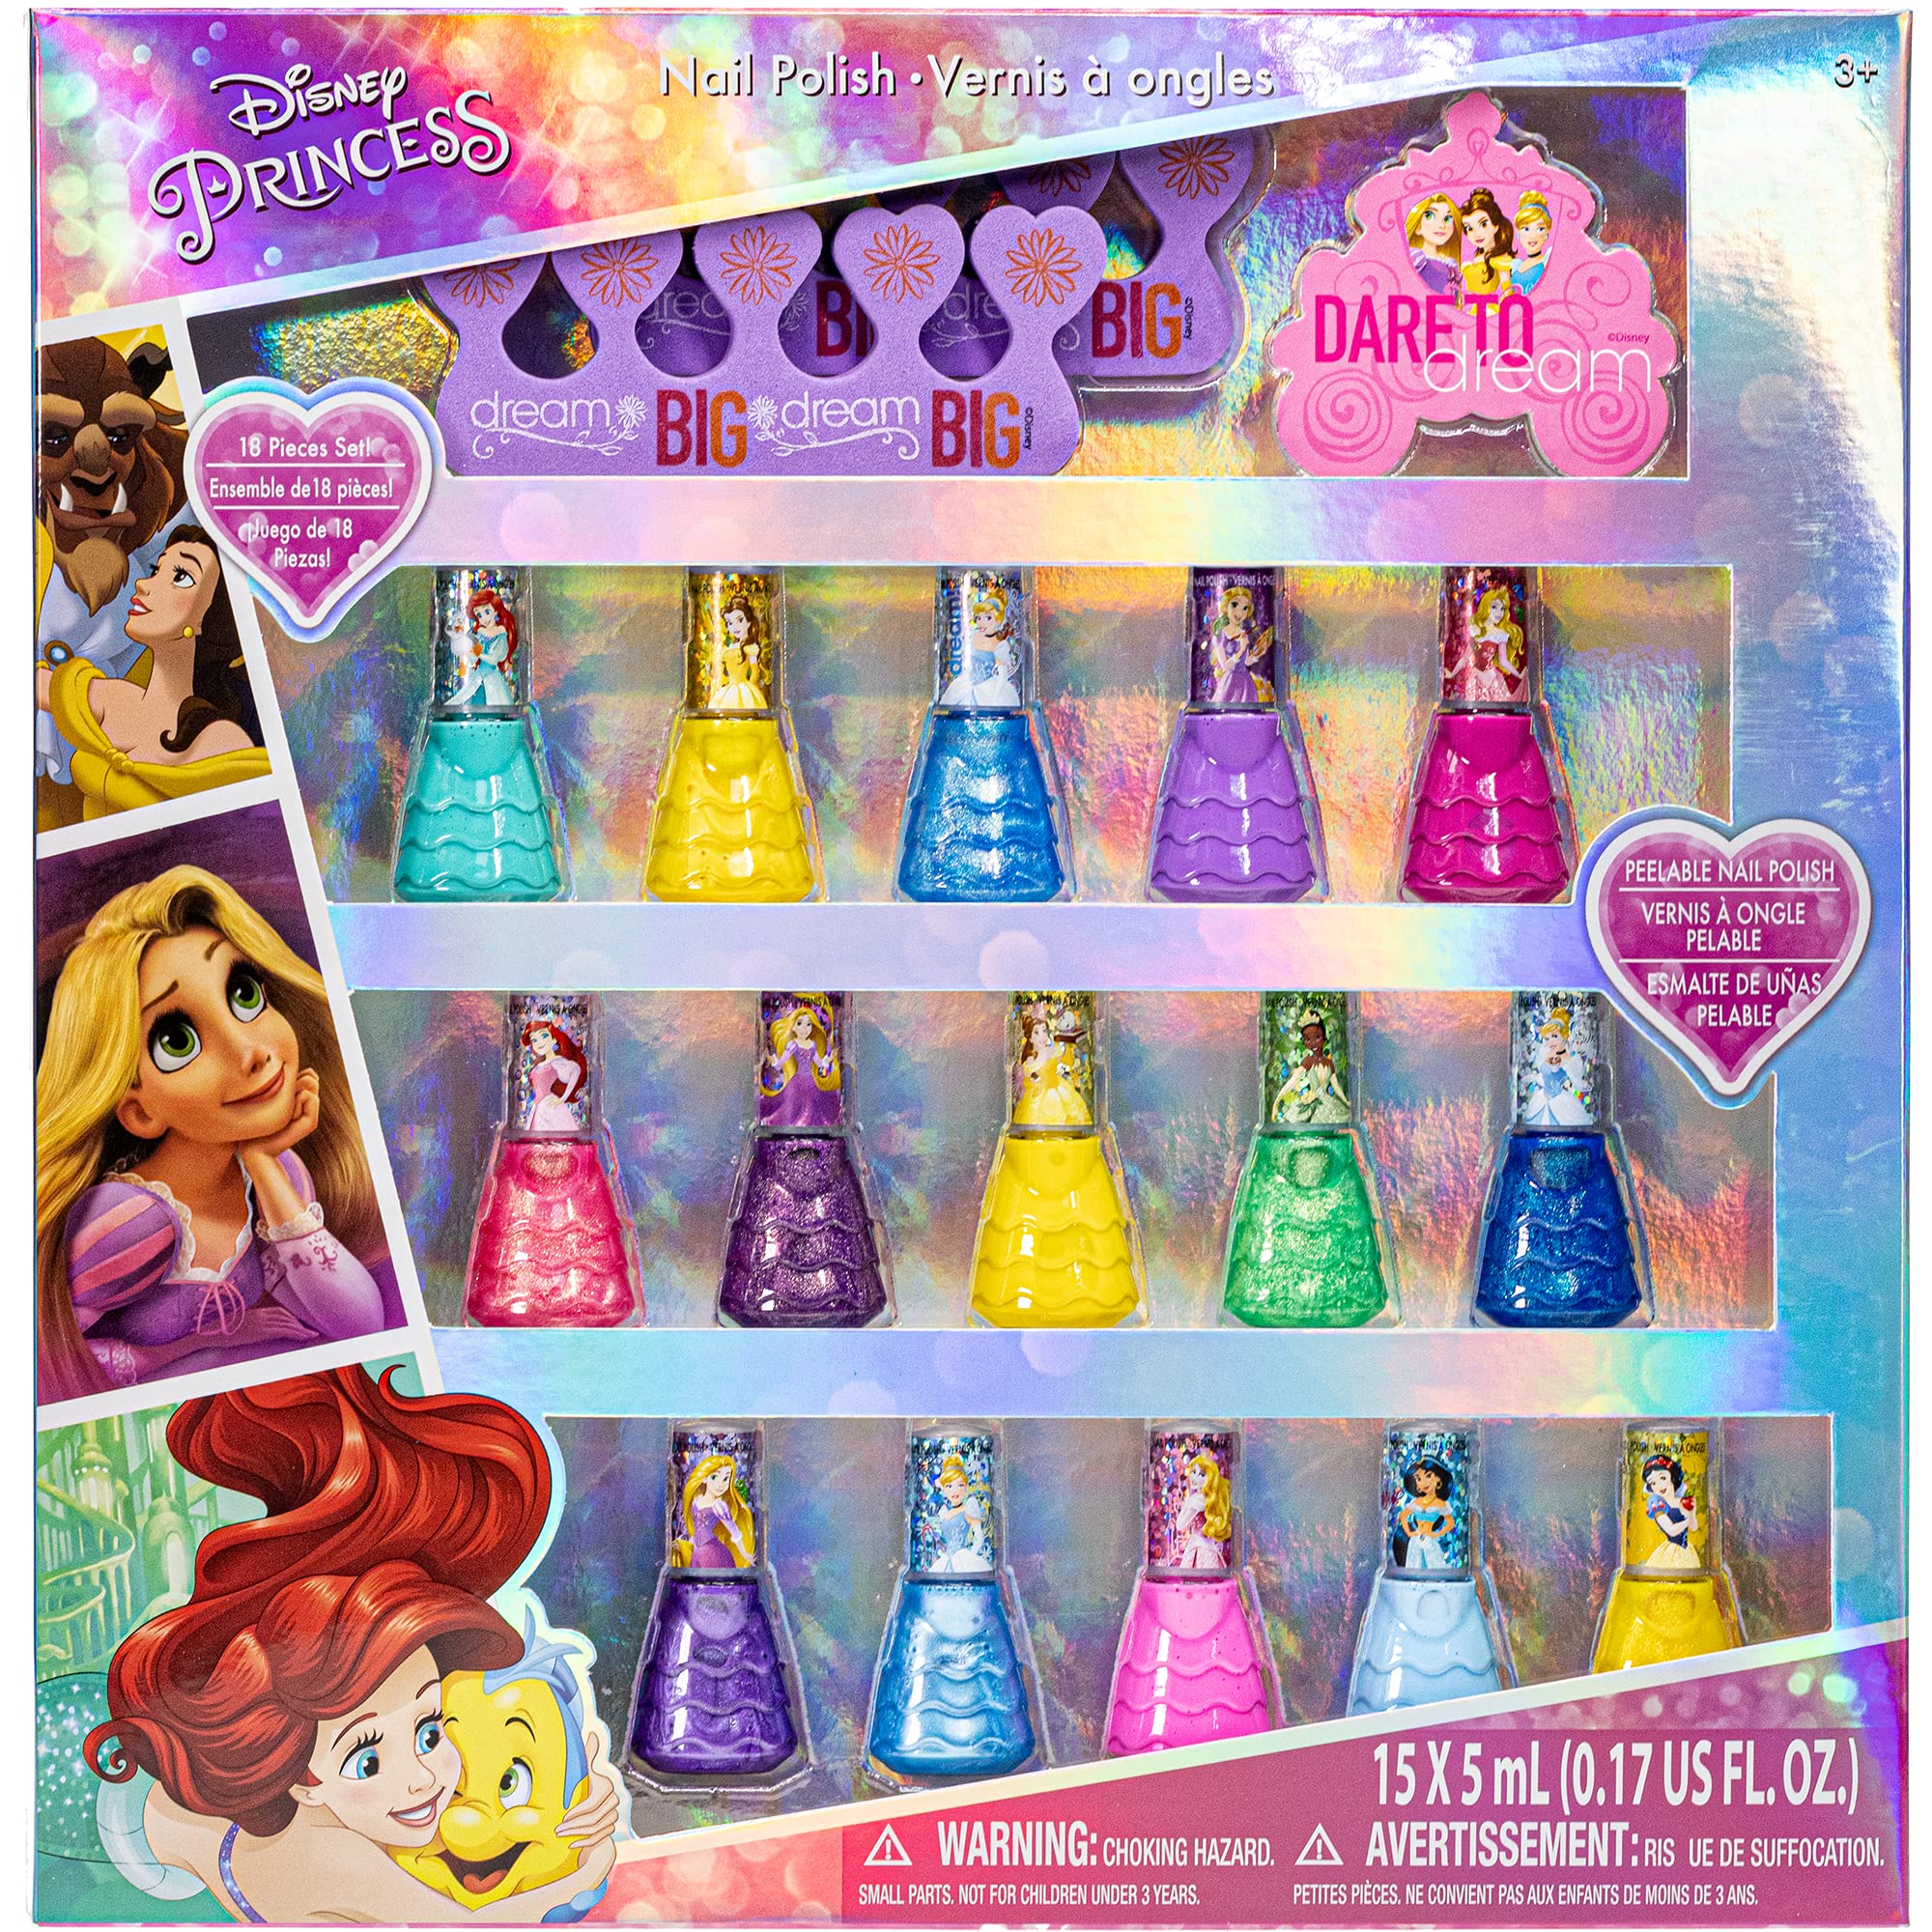 Disney Princess - Townley Girl Non-Toxic Peel-Off Water-Based Natural Safe Quick Dry Nail Polish| Gift Kit Set for Kids Girls| Glittery and Opaque Colors| Ages 3+ (18 Pcs)